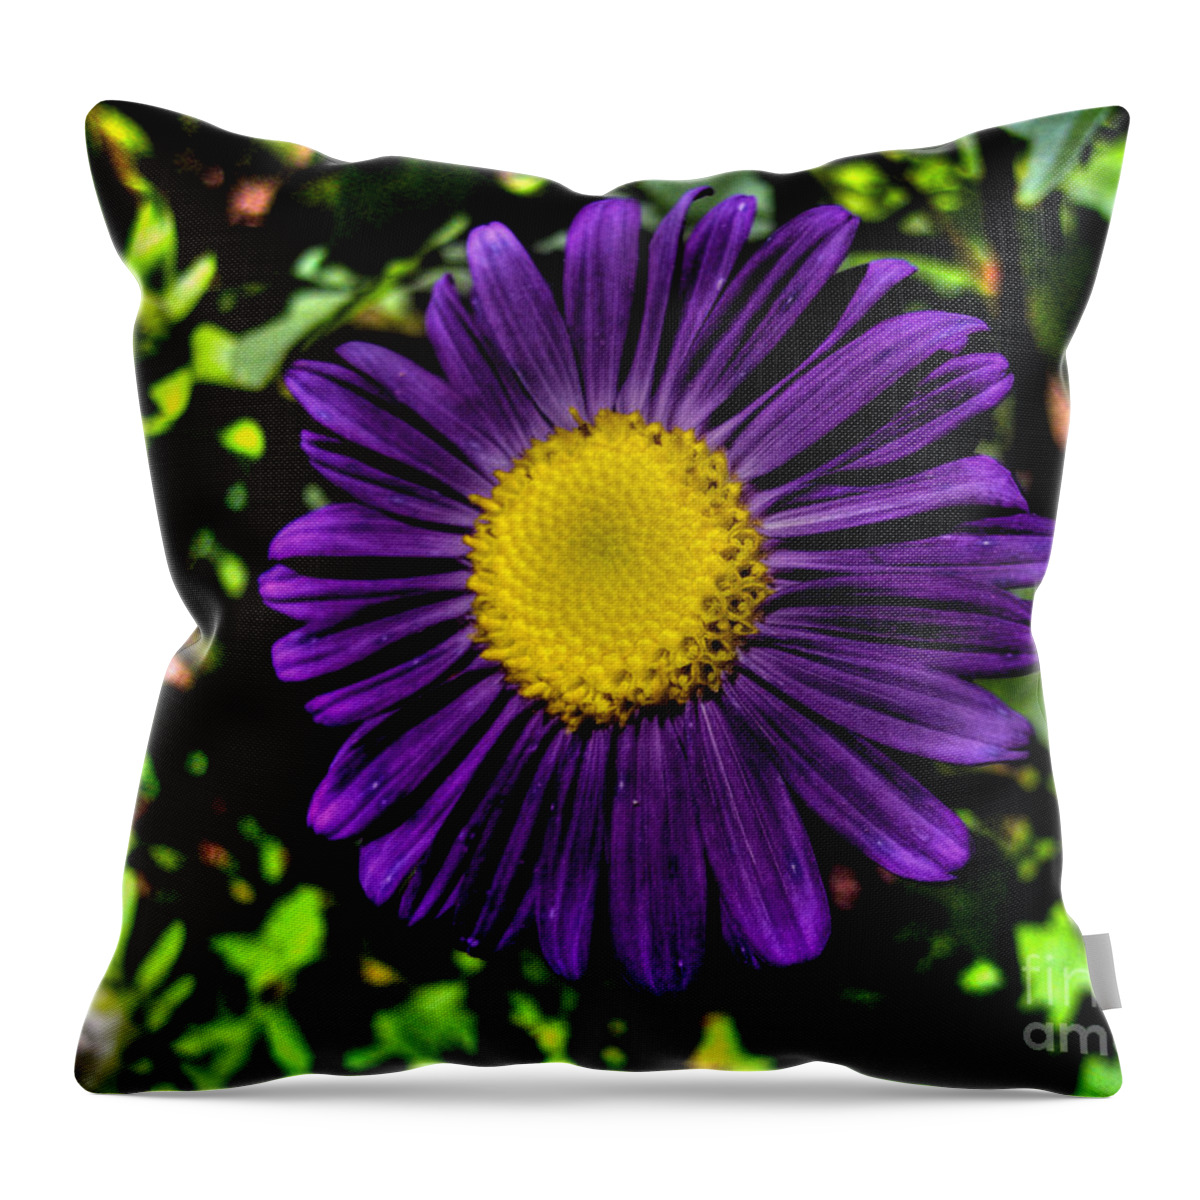 Aster Throw Pillow featuring the photograph Violet Aster by Nina Ficur Feenan